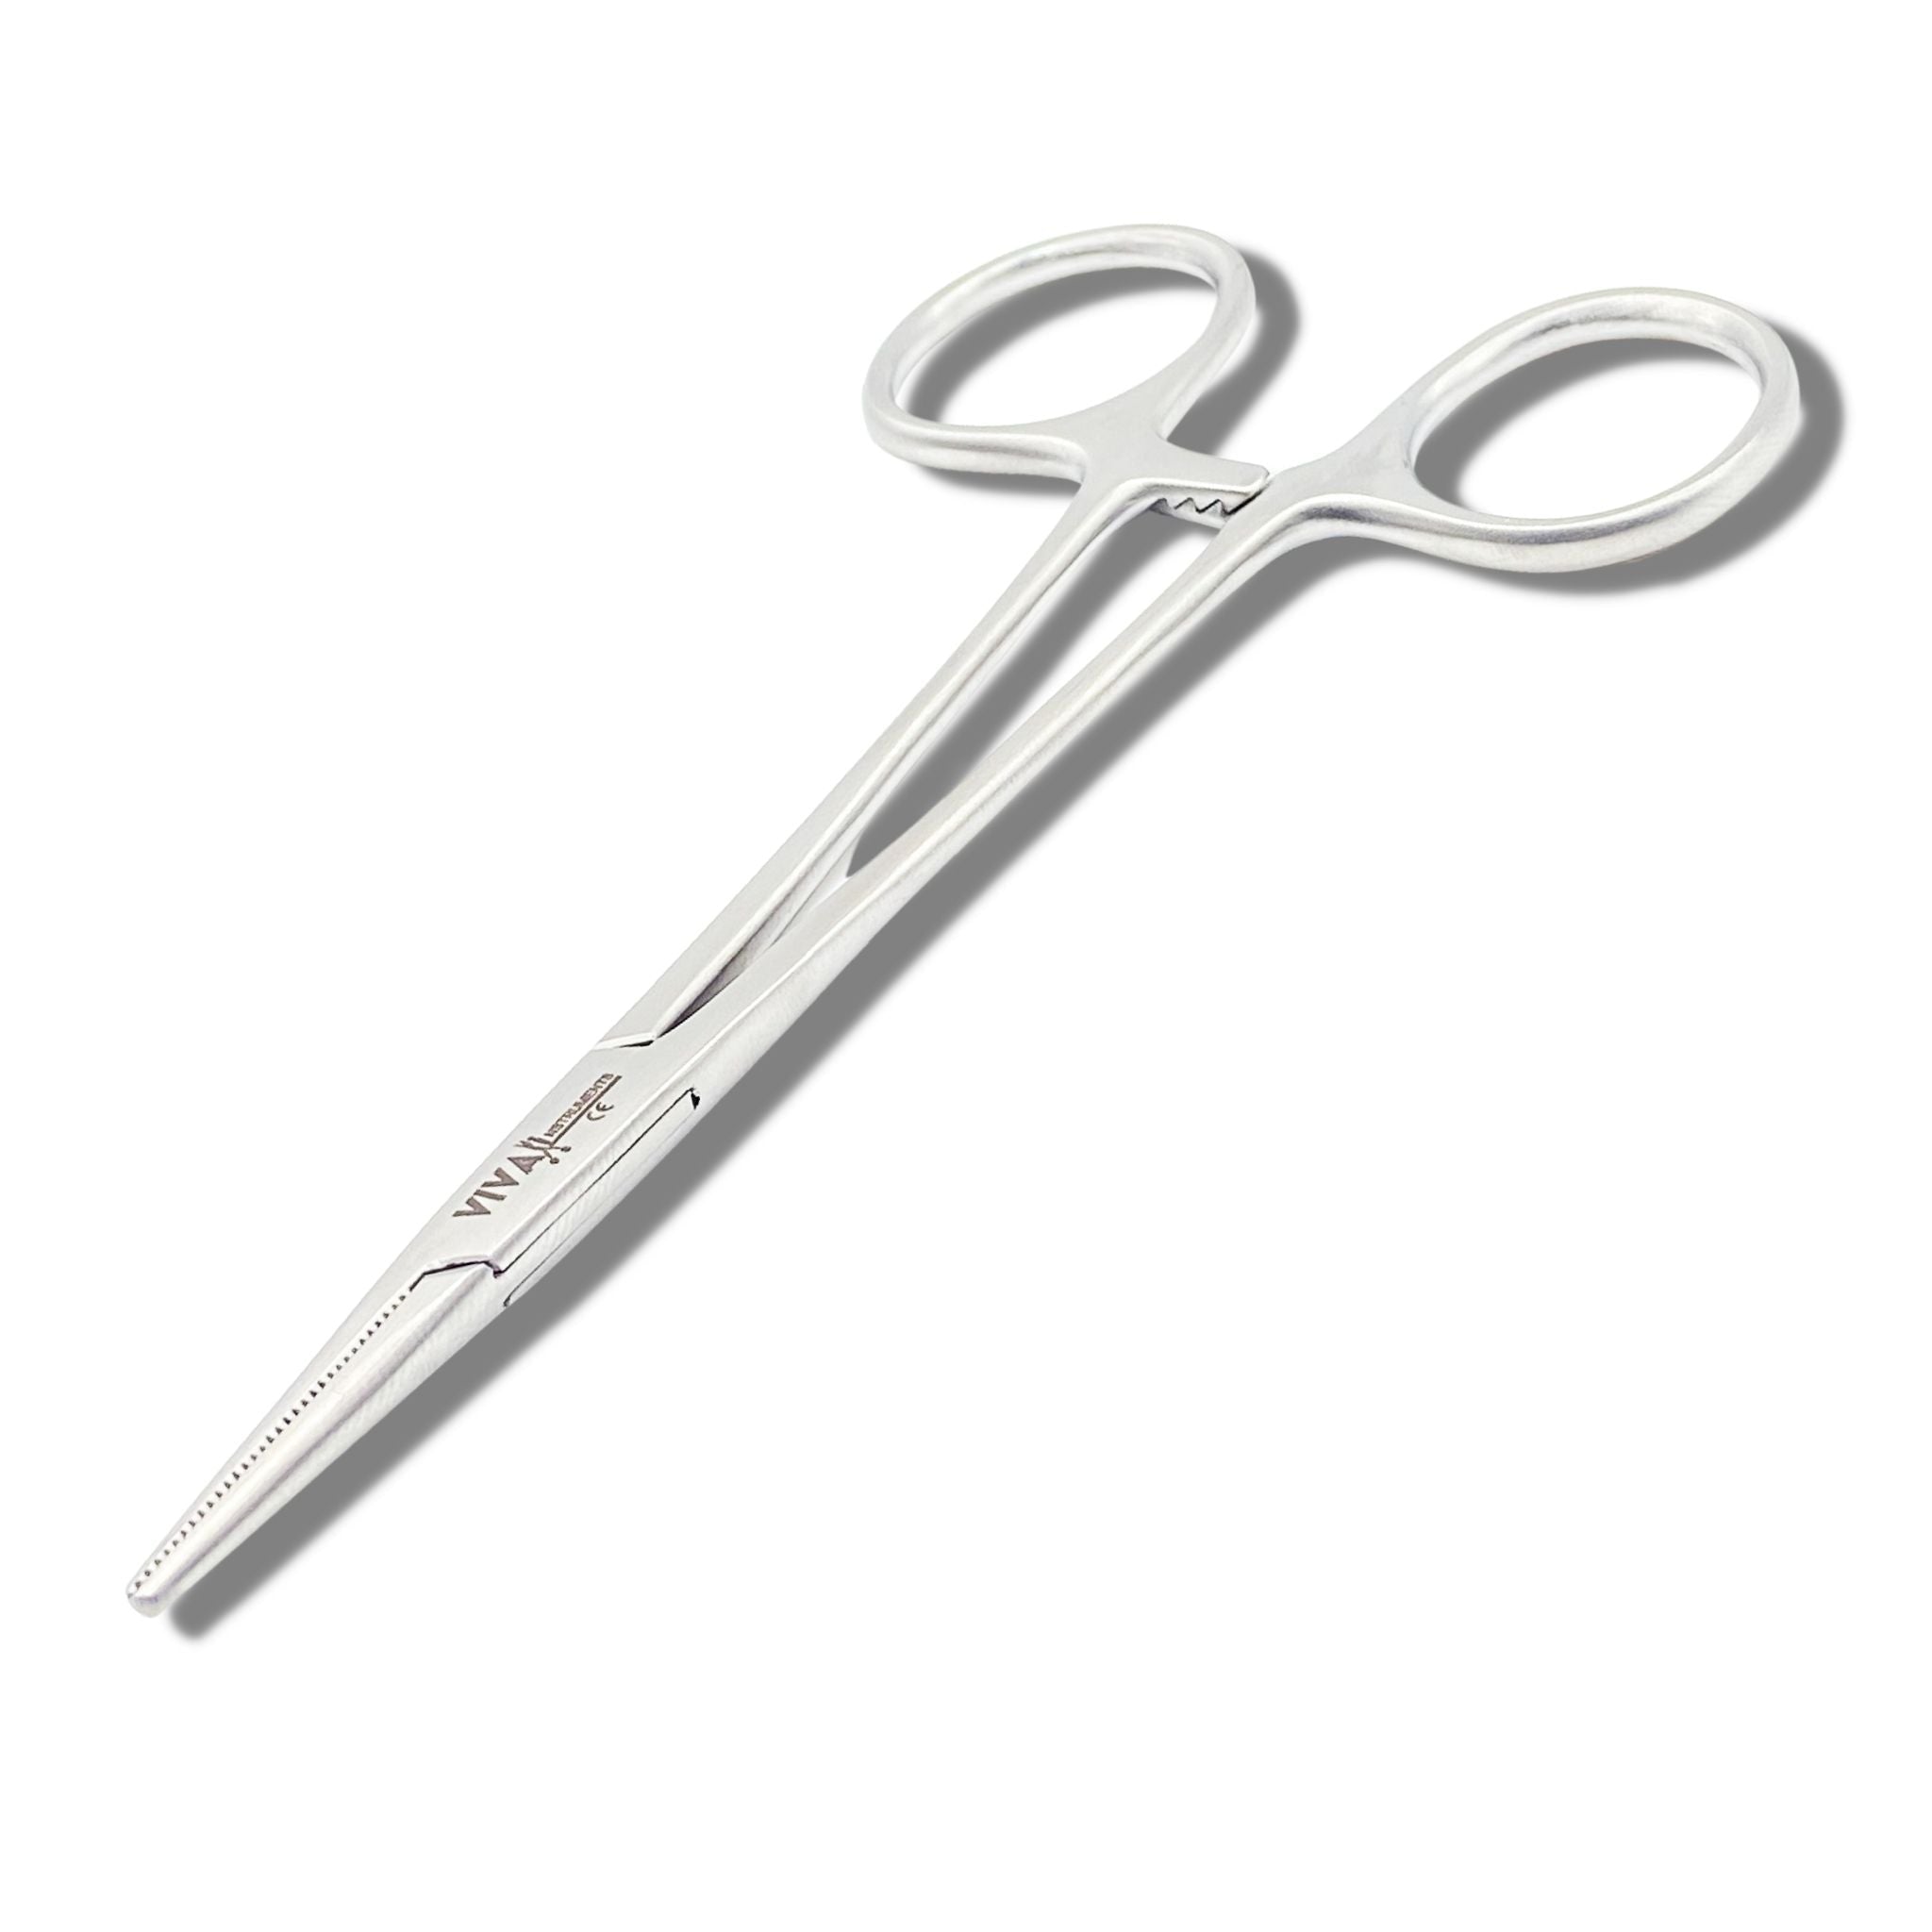 Artery Forceps - Mosquito Forceps surgical instruments tatto percing tools medical Straight 12.5cm